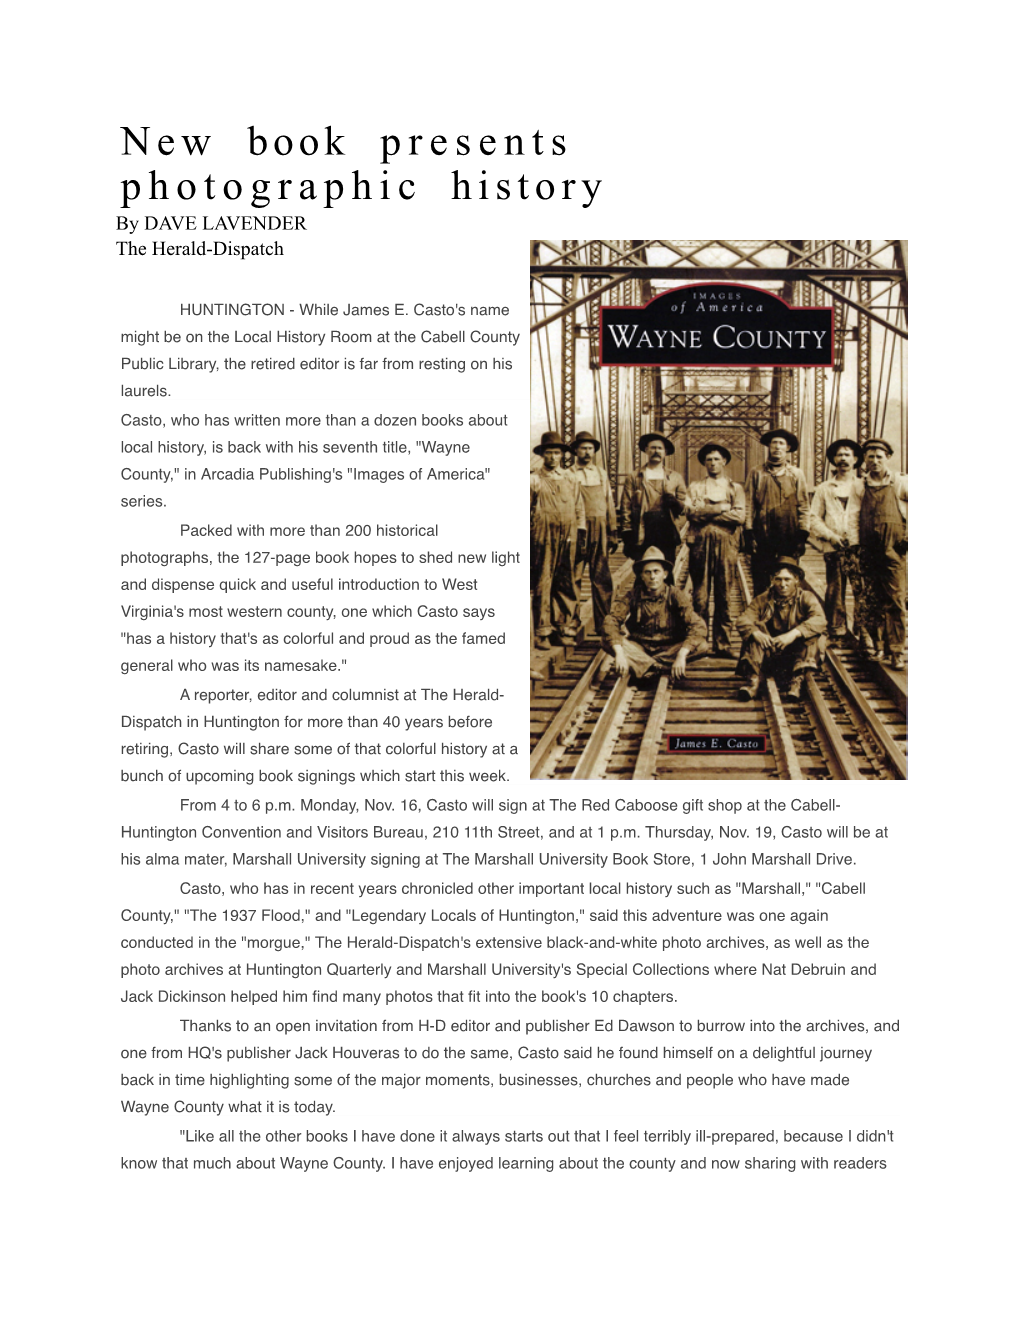 New Book Presents Photographic History by DAVE LAVENDER the Herald-Dispatch